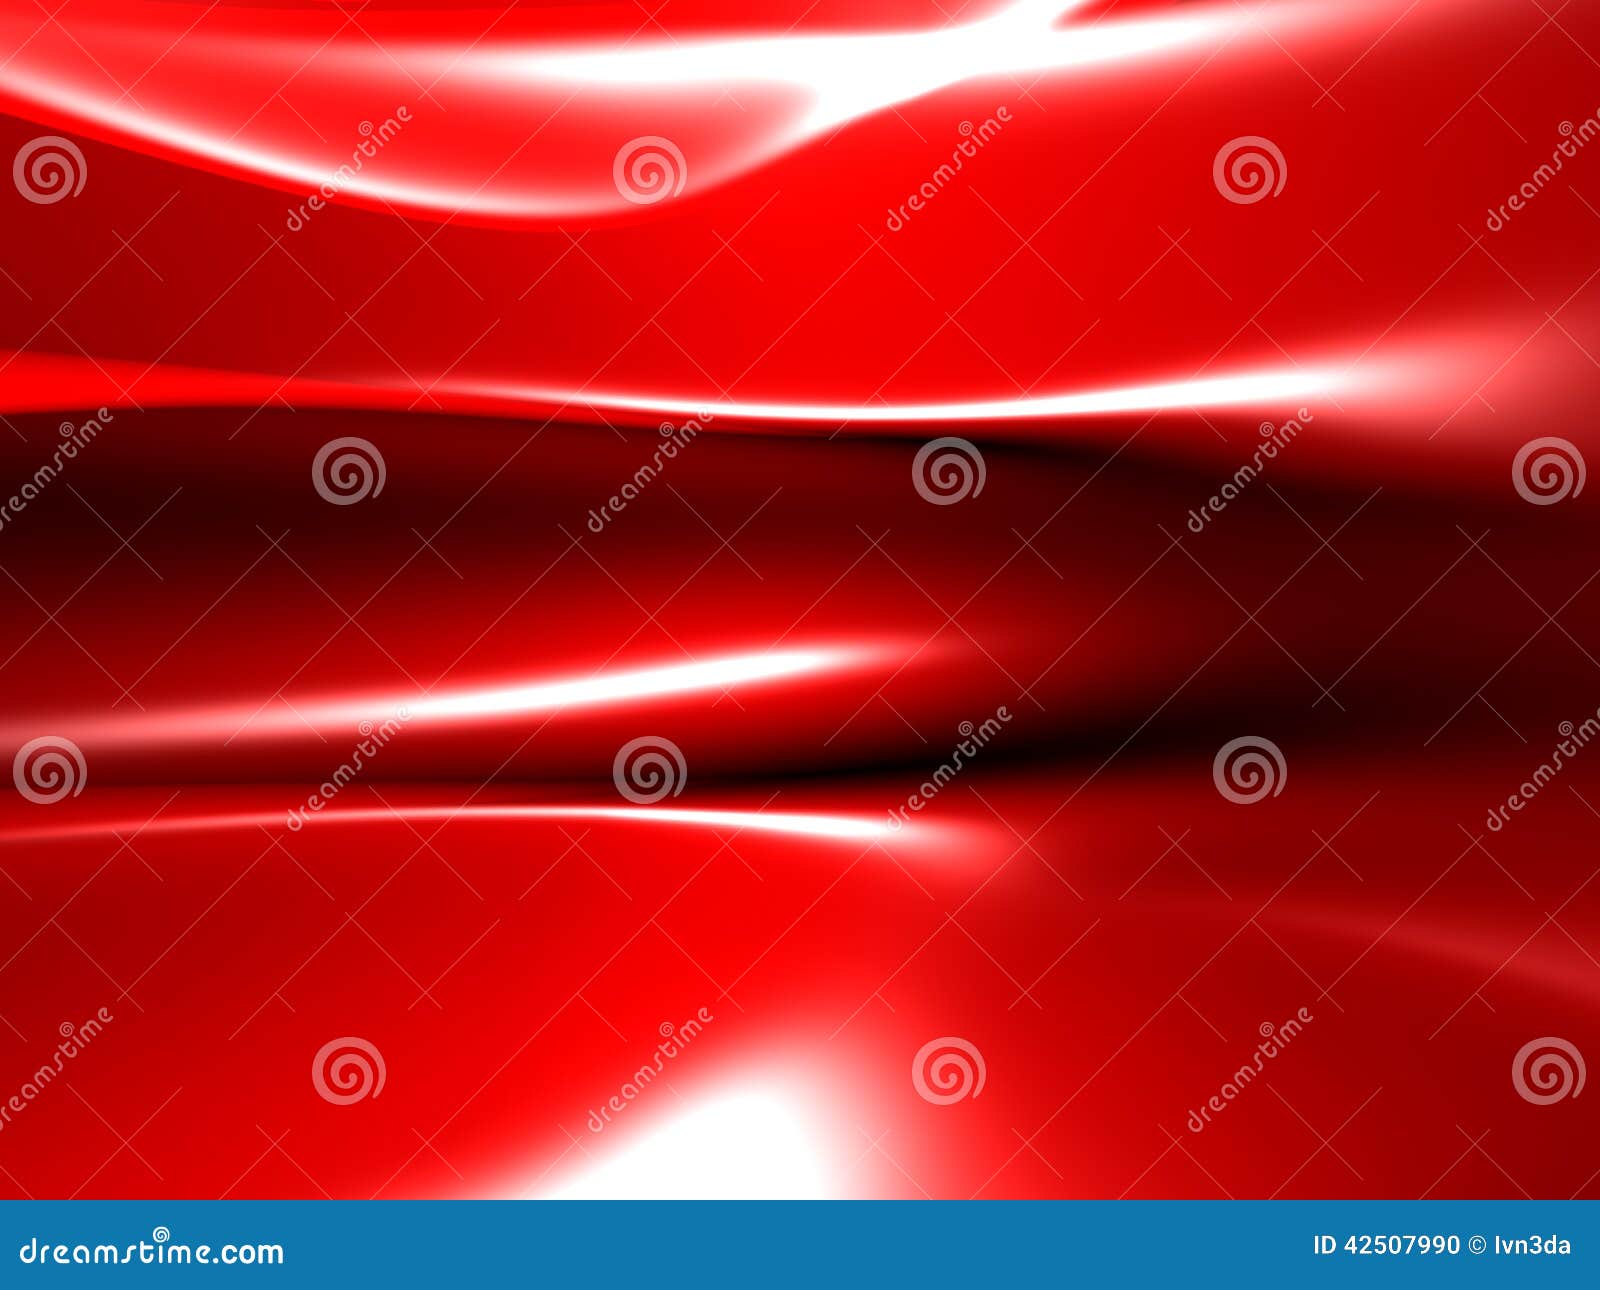 glossy red abstract background